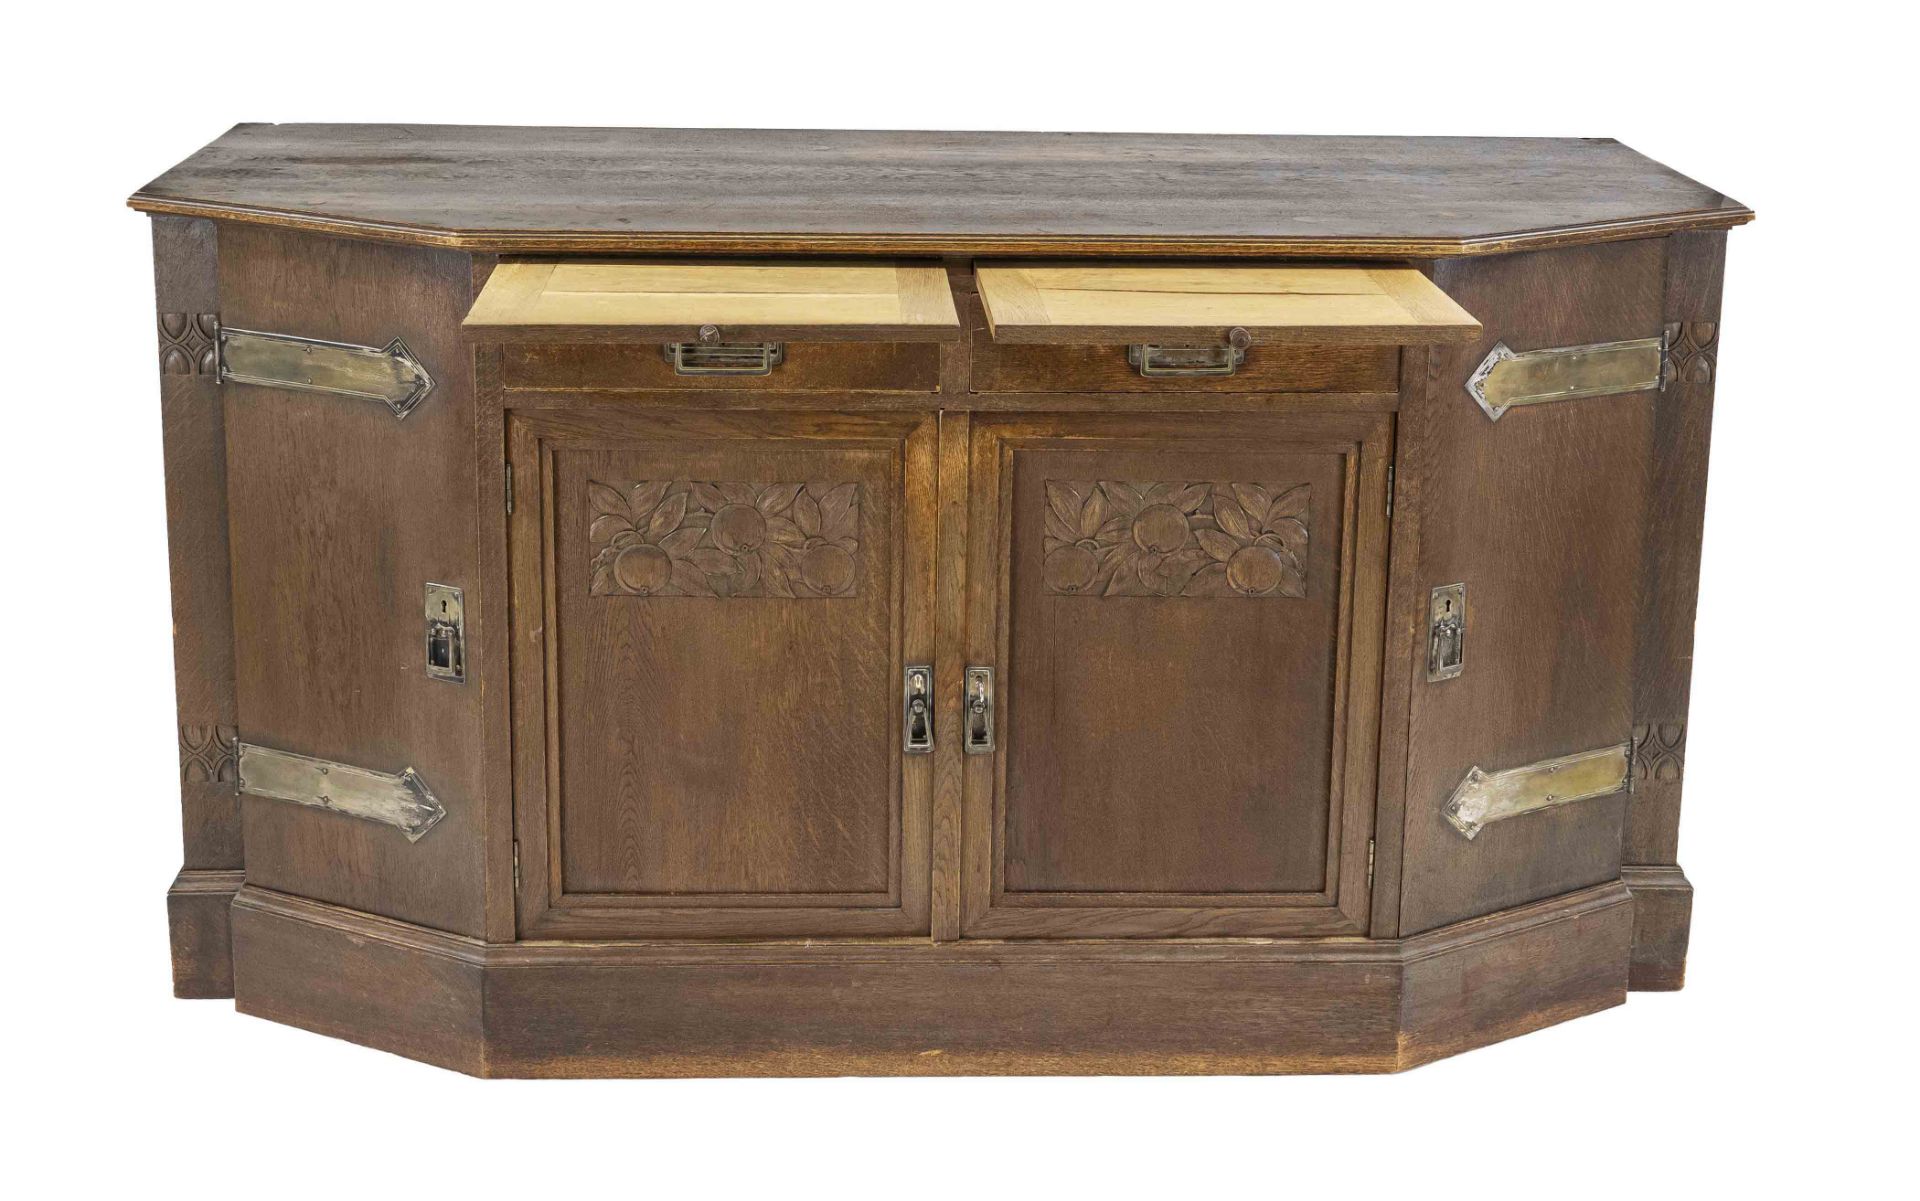 Art Nouveau sideboard circa 1910, oak, four doors and two drawers, subtle carved decoration, 98 x - Image 2 of 2